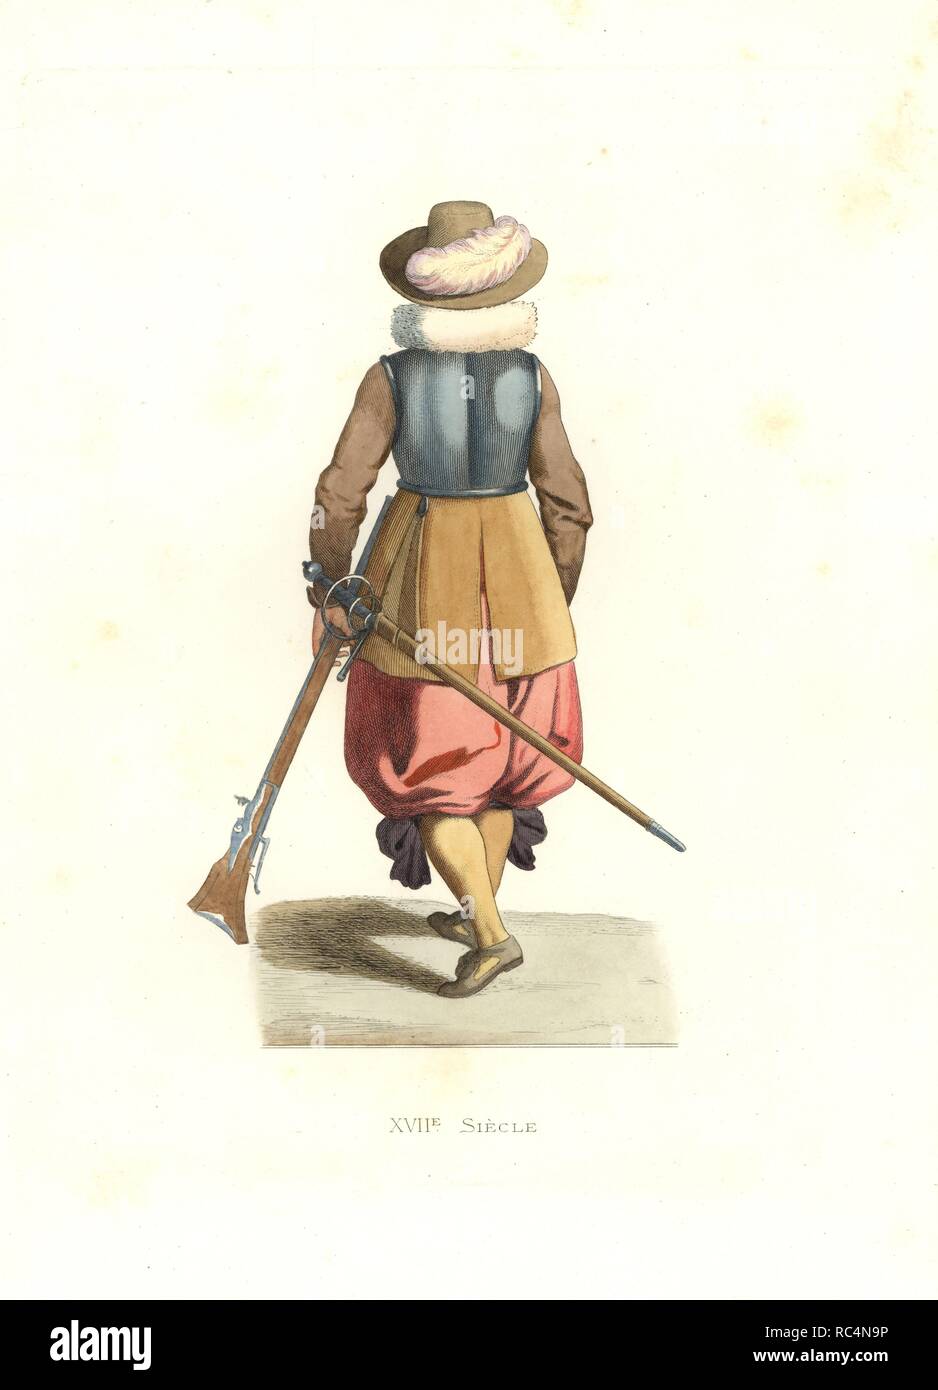 Musketeer from French Flanders, 17th century, from an original painting. Handcolored illustration by E. Lechevallier-Chevignard, lithographed by A. Didier, L. Flameng, F. Laguillermie, from Georges Duplessis's 'Costumes historiques des XVIe, XVIIe et XVIIIe siecles' (Historical costumes of the 16th, 17th and 18th centuries), Paris 1867. The book was a continuation of the series on the costumes of the 12th to 15th centuries published by Camille Bonnard and Paul Mercuri from 1830. Georges Duplessis (1834-1899) was curator of the Prints department at the Bibliotheque nationale. Edmond Lechevallie Stock Photo